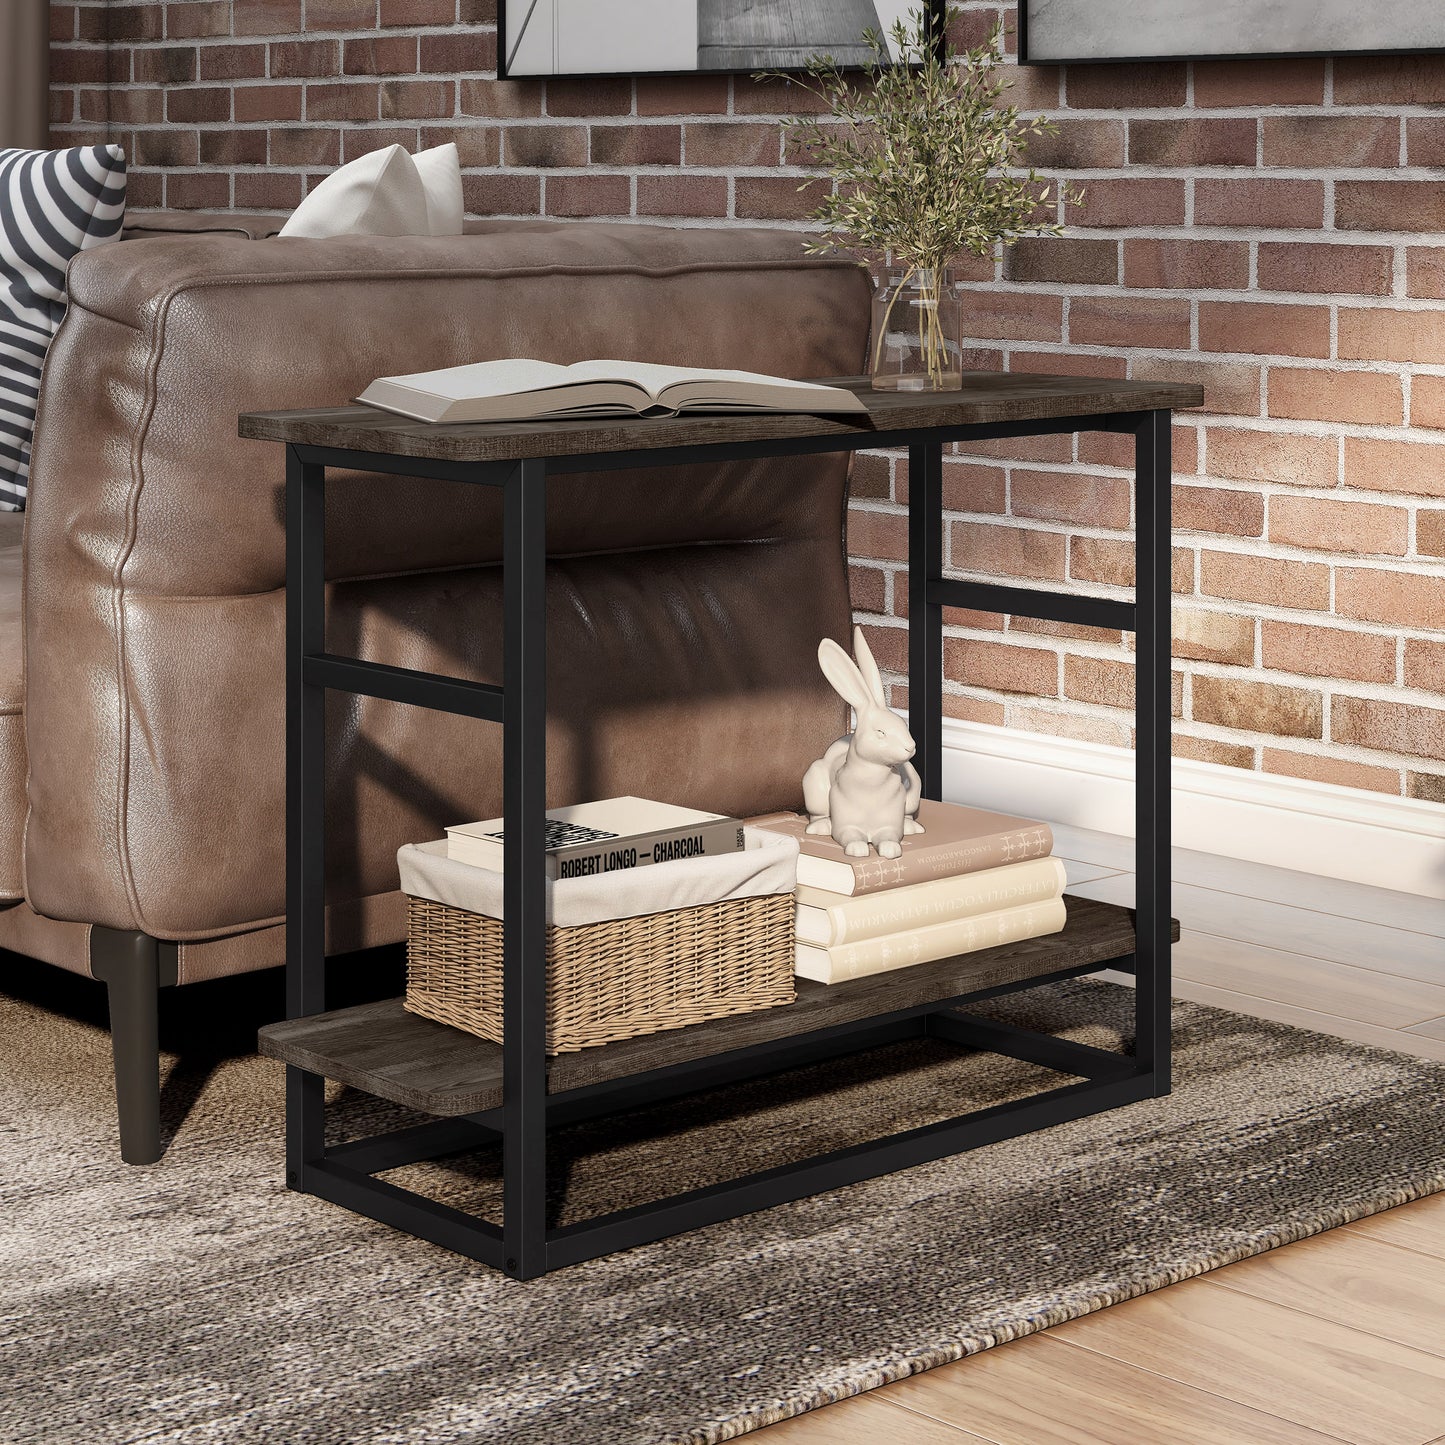 Left angled industrial reclaimed oak one-shelf long side table in a living room with accessories